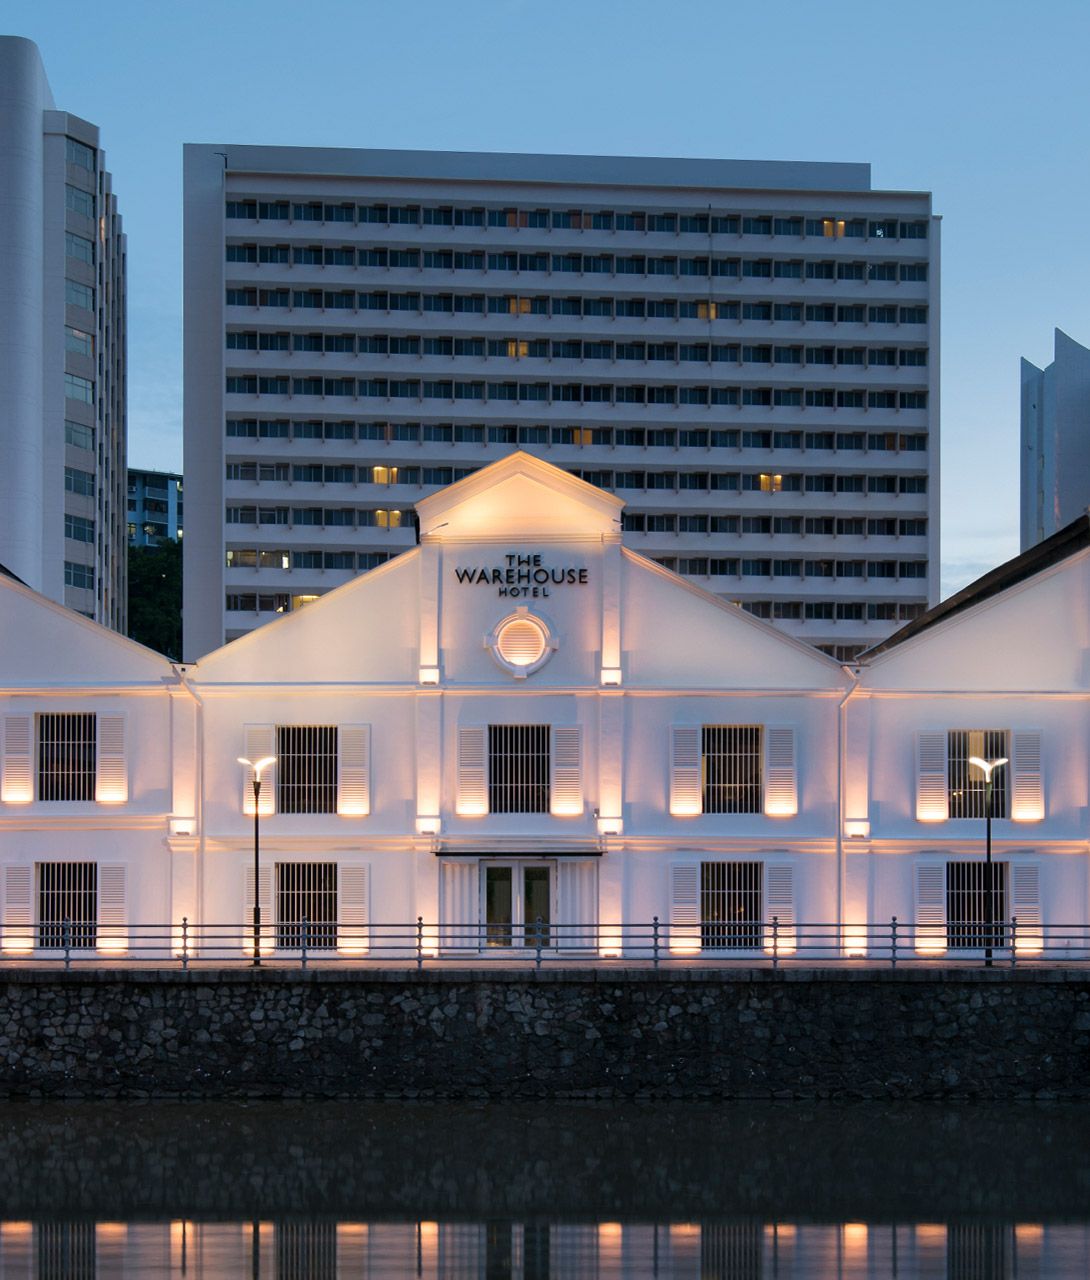 The Warehouse Hotel Architecture in Singapore